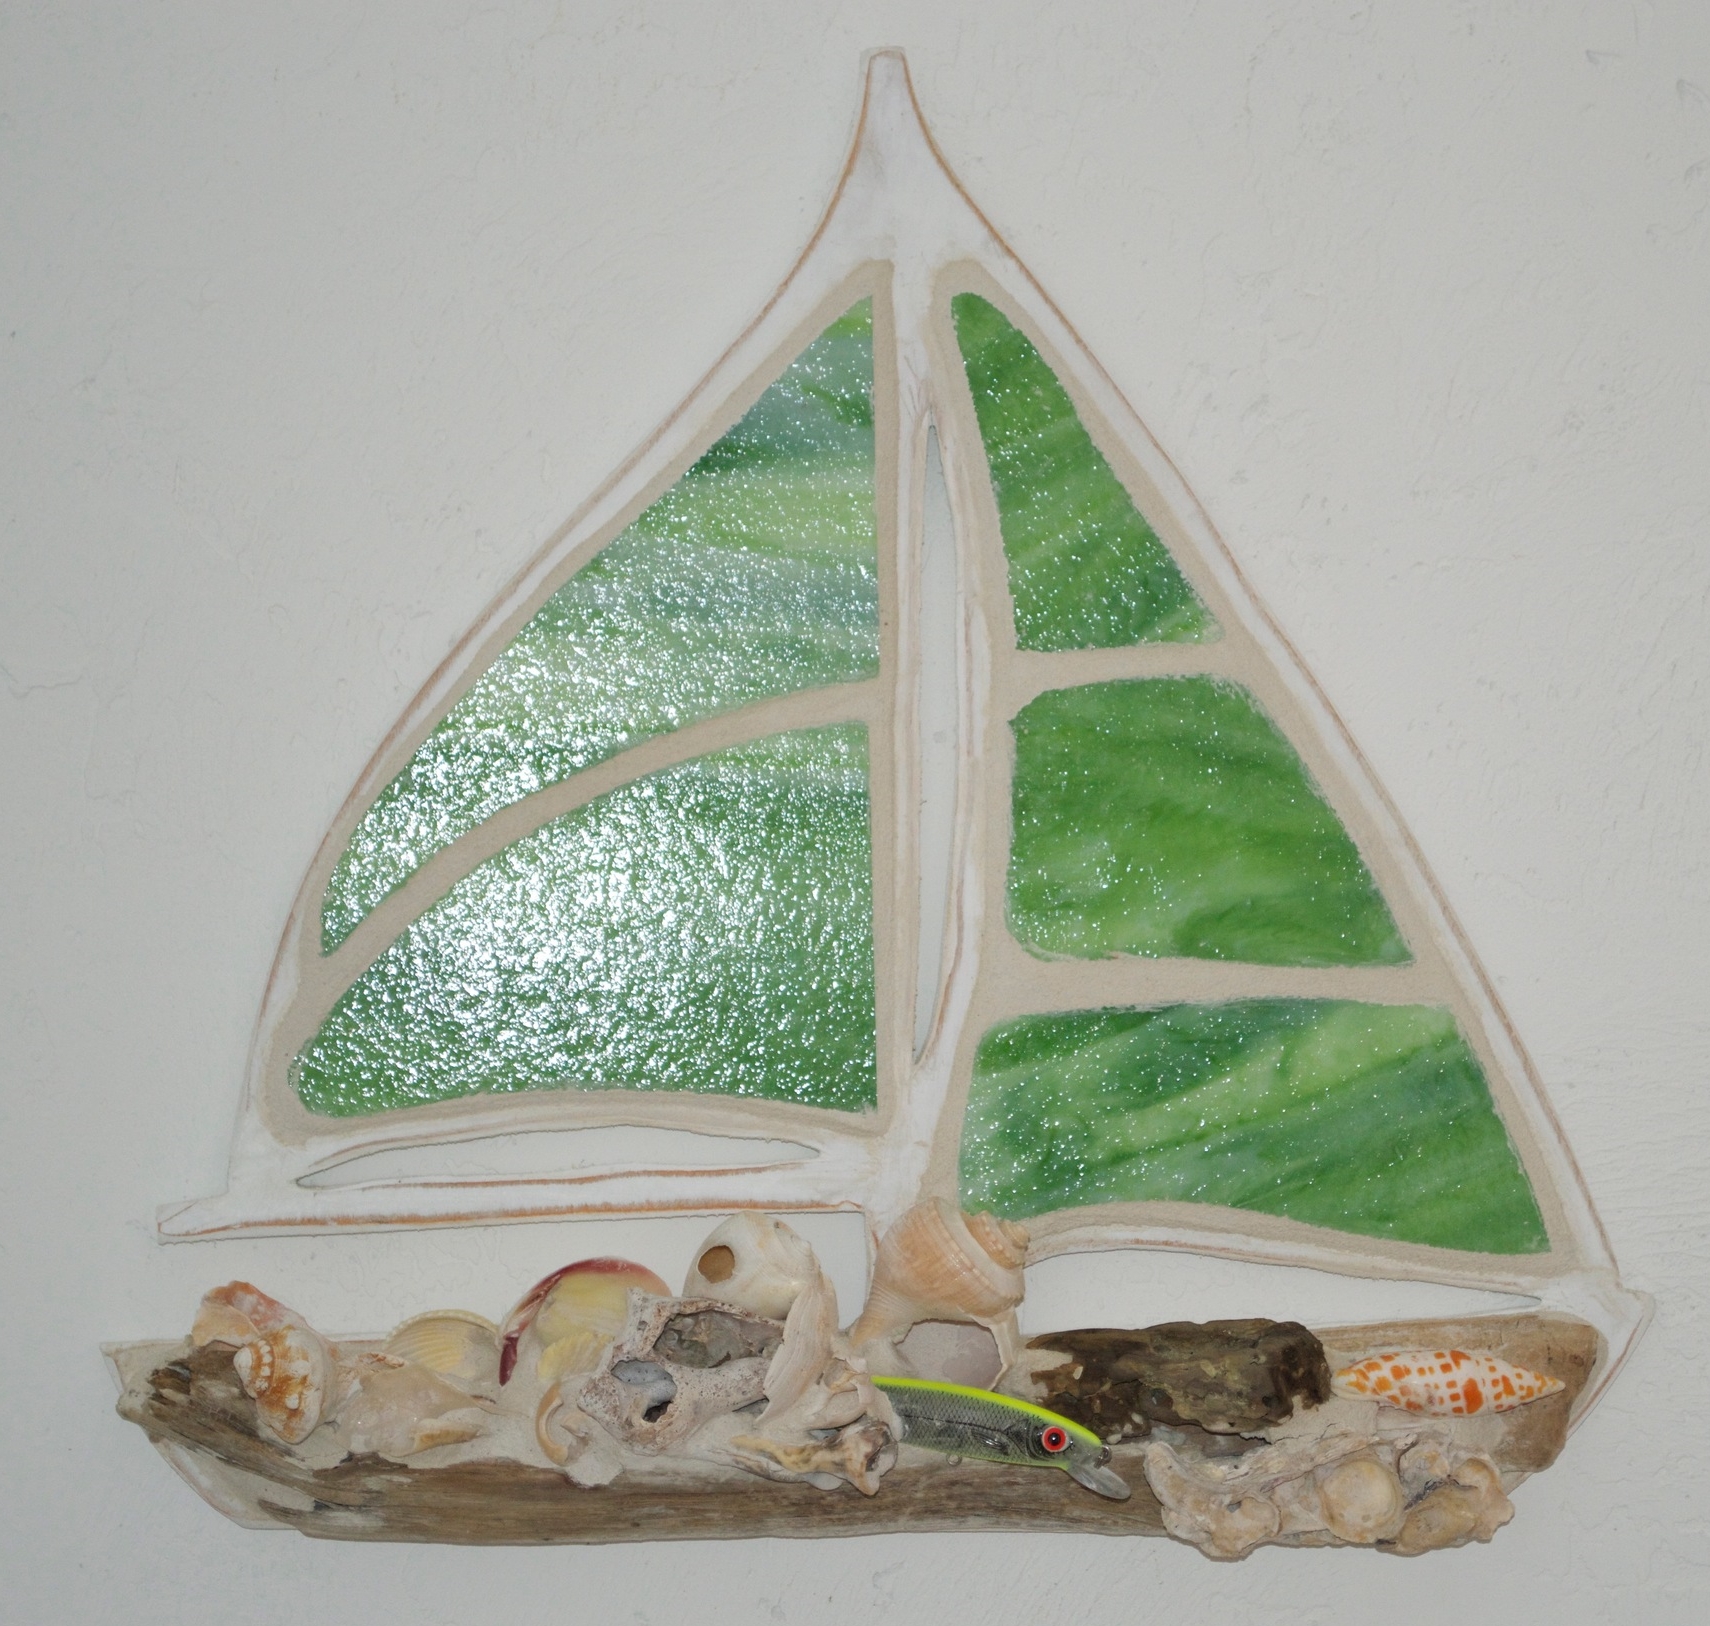 Beach Art - Sailboat - wood, stained glass, beach objects - small 11" x 12", large 21" x 19" $149